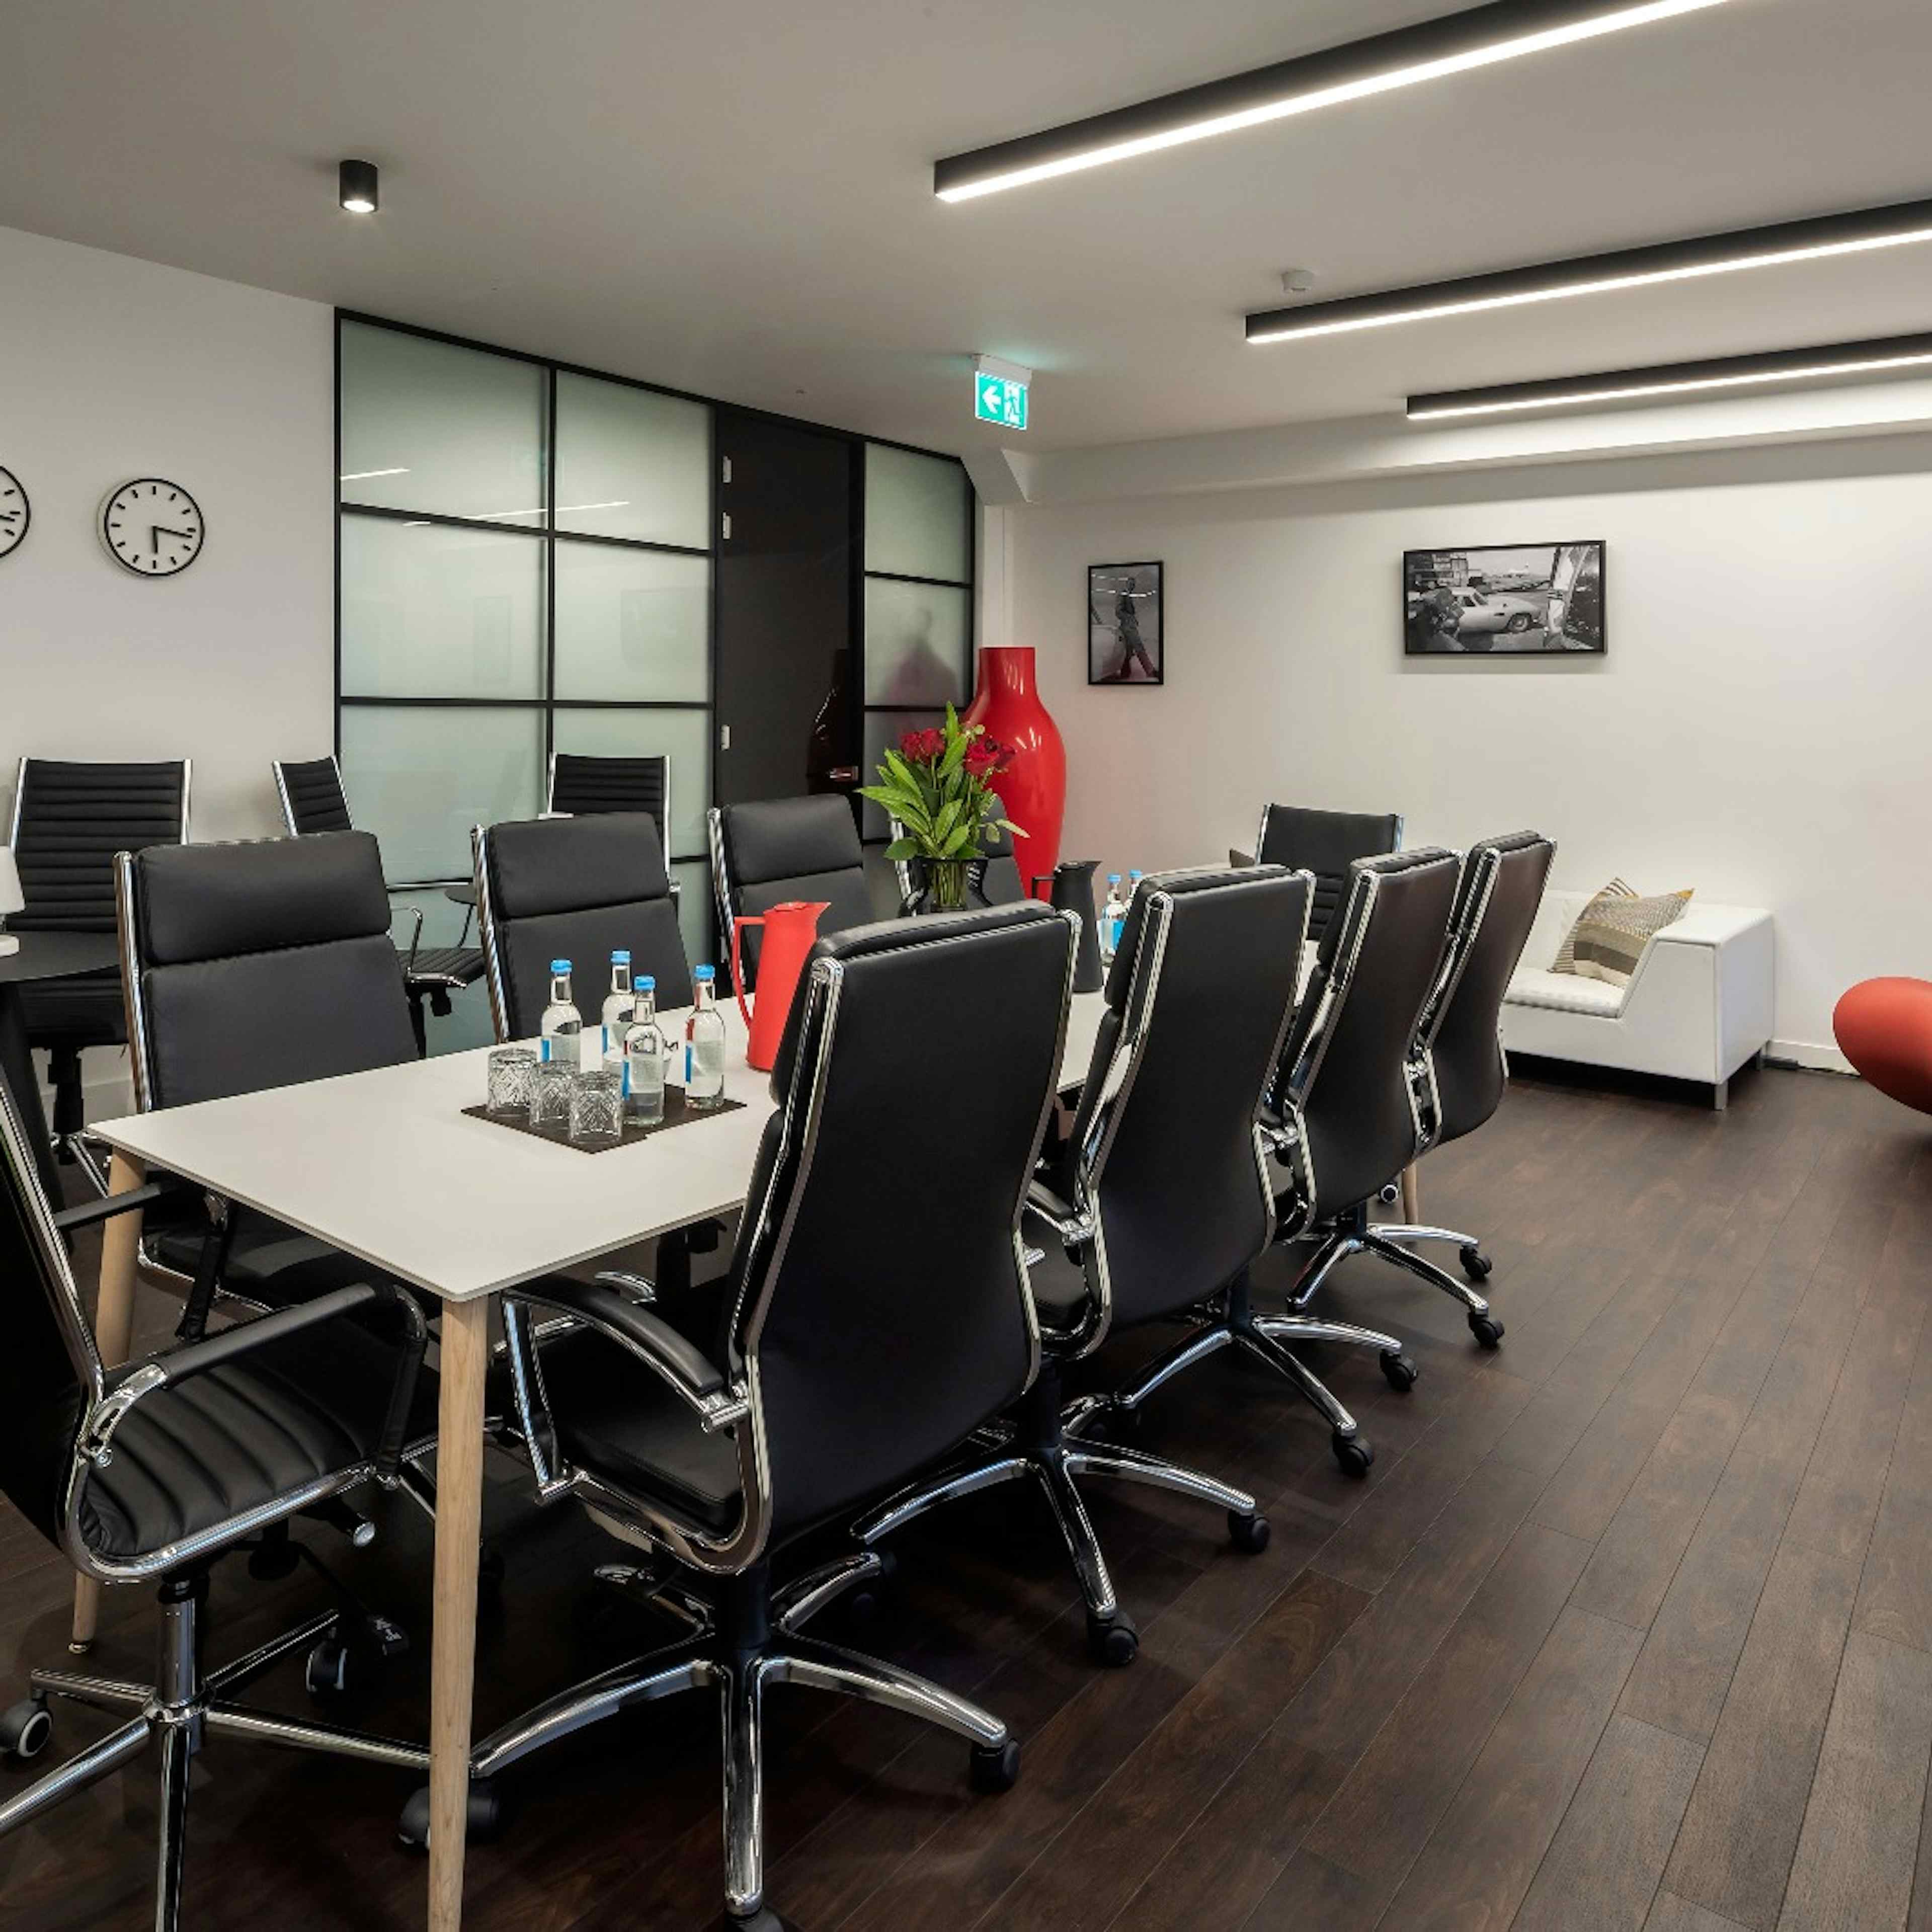 W1 Workspace - The Mayfair Room image 2